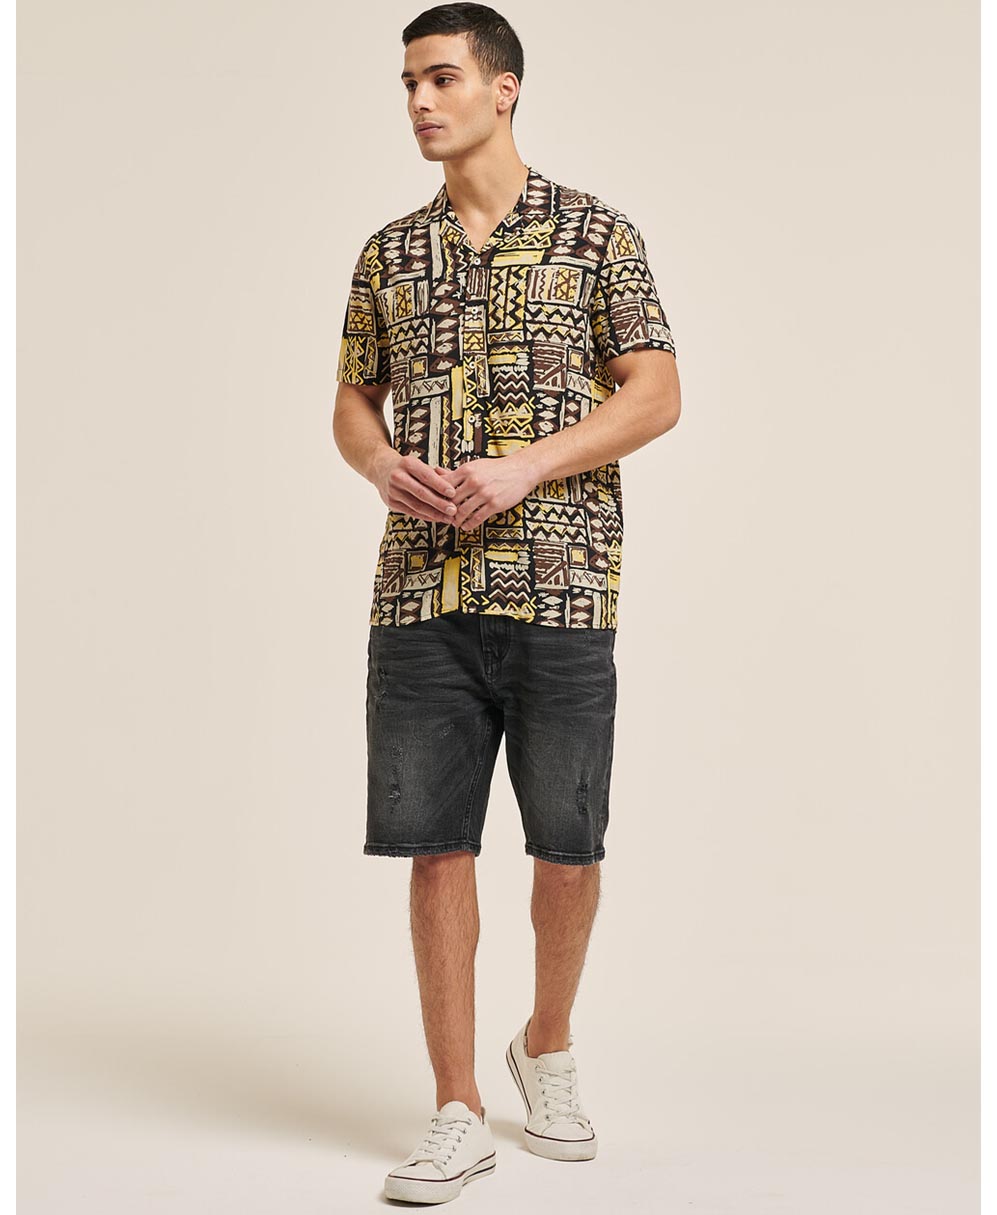 aztec shirt made in italy lino cotton 2021